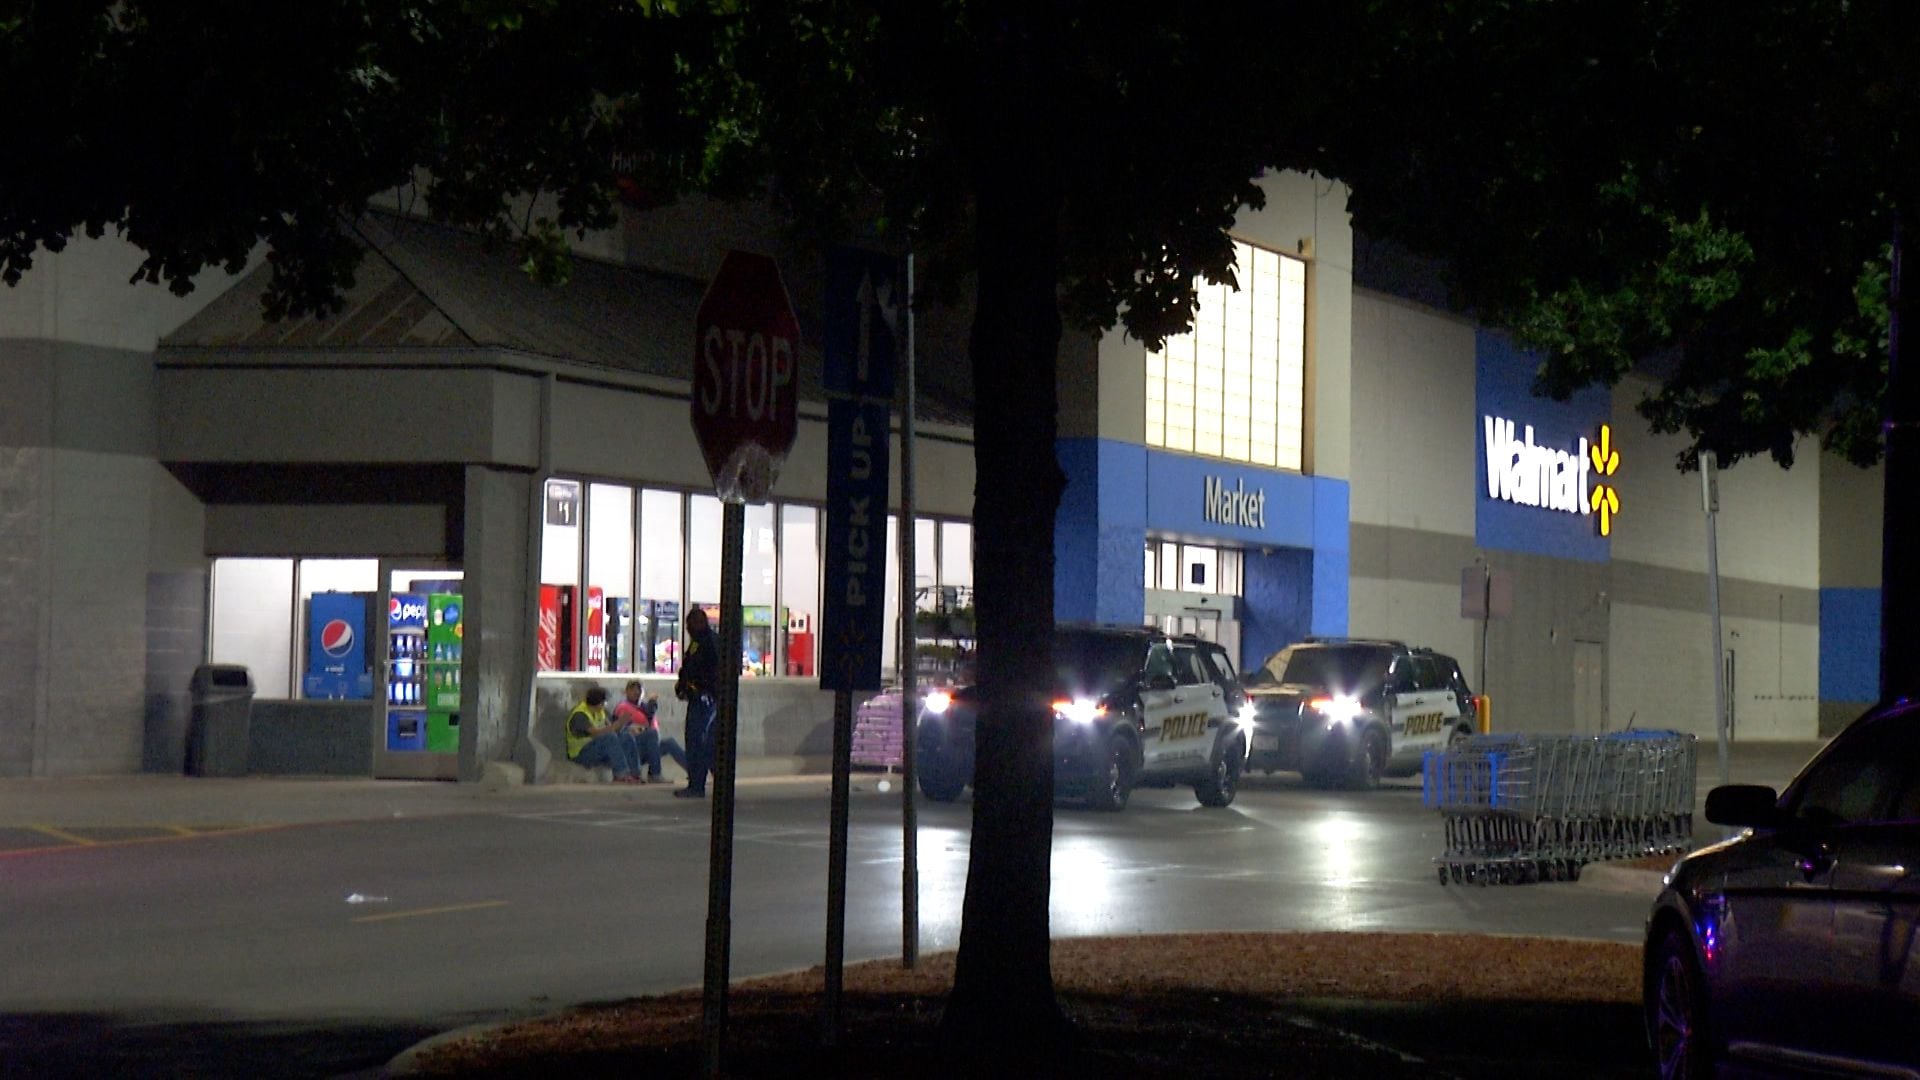 Woman hospitalized after being hit by vehicle in Walmart parking lot, police say